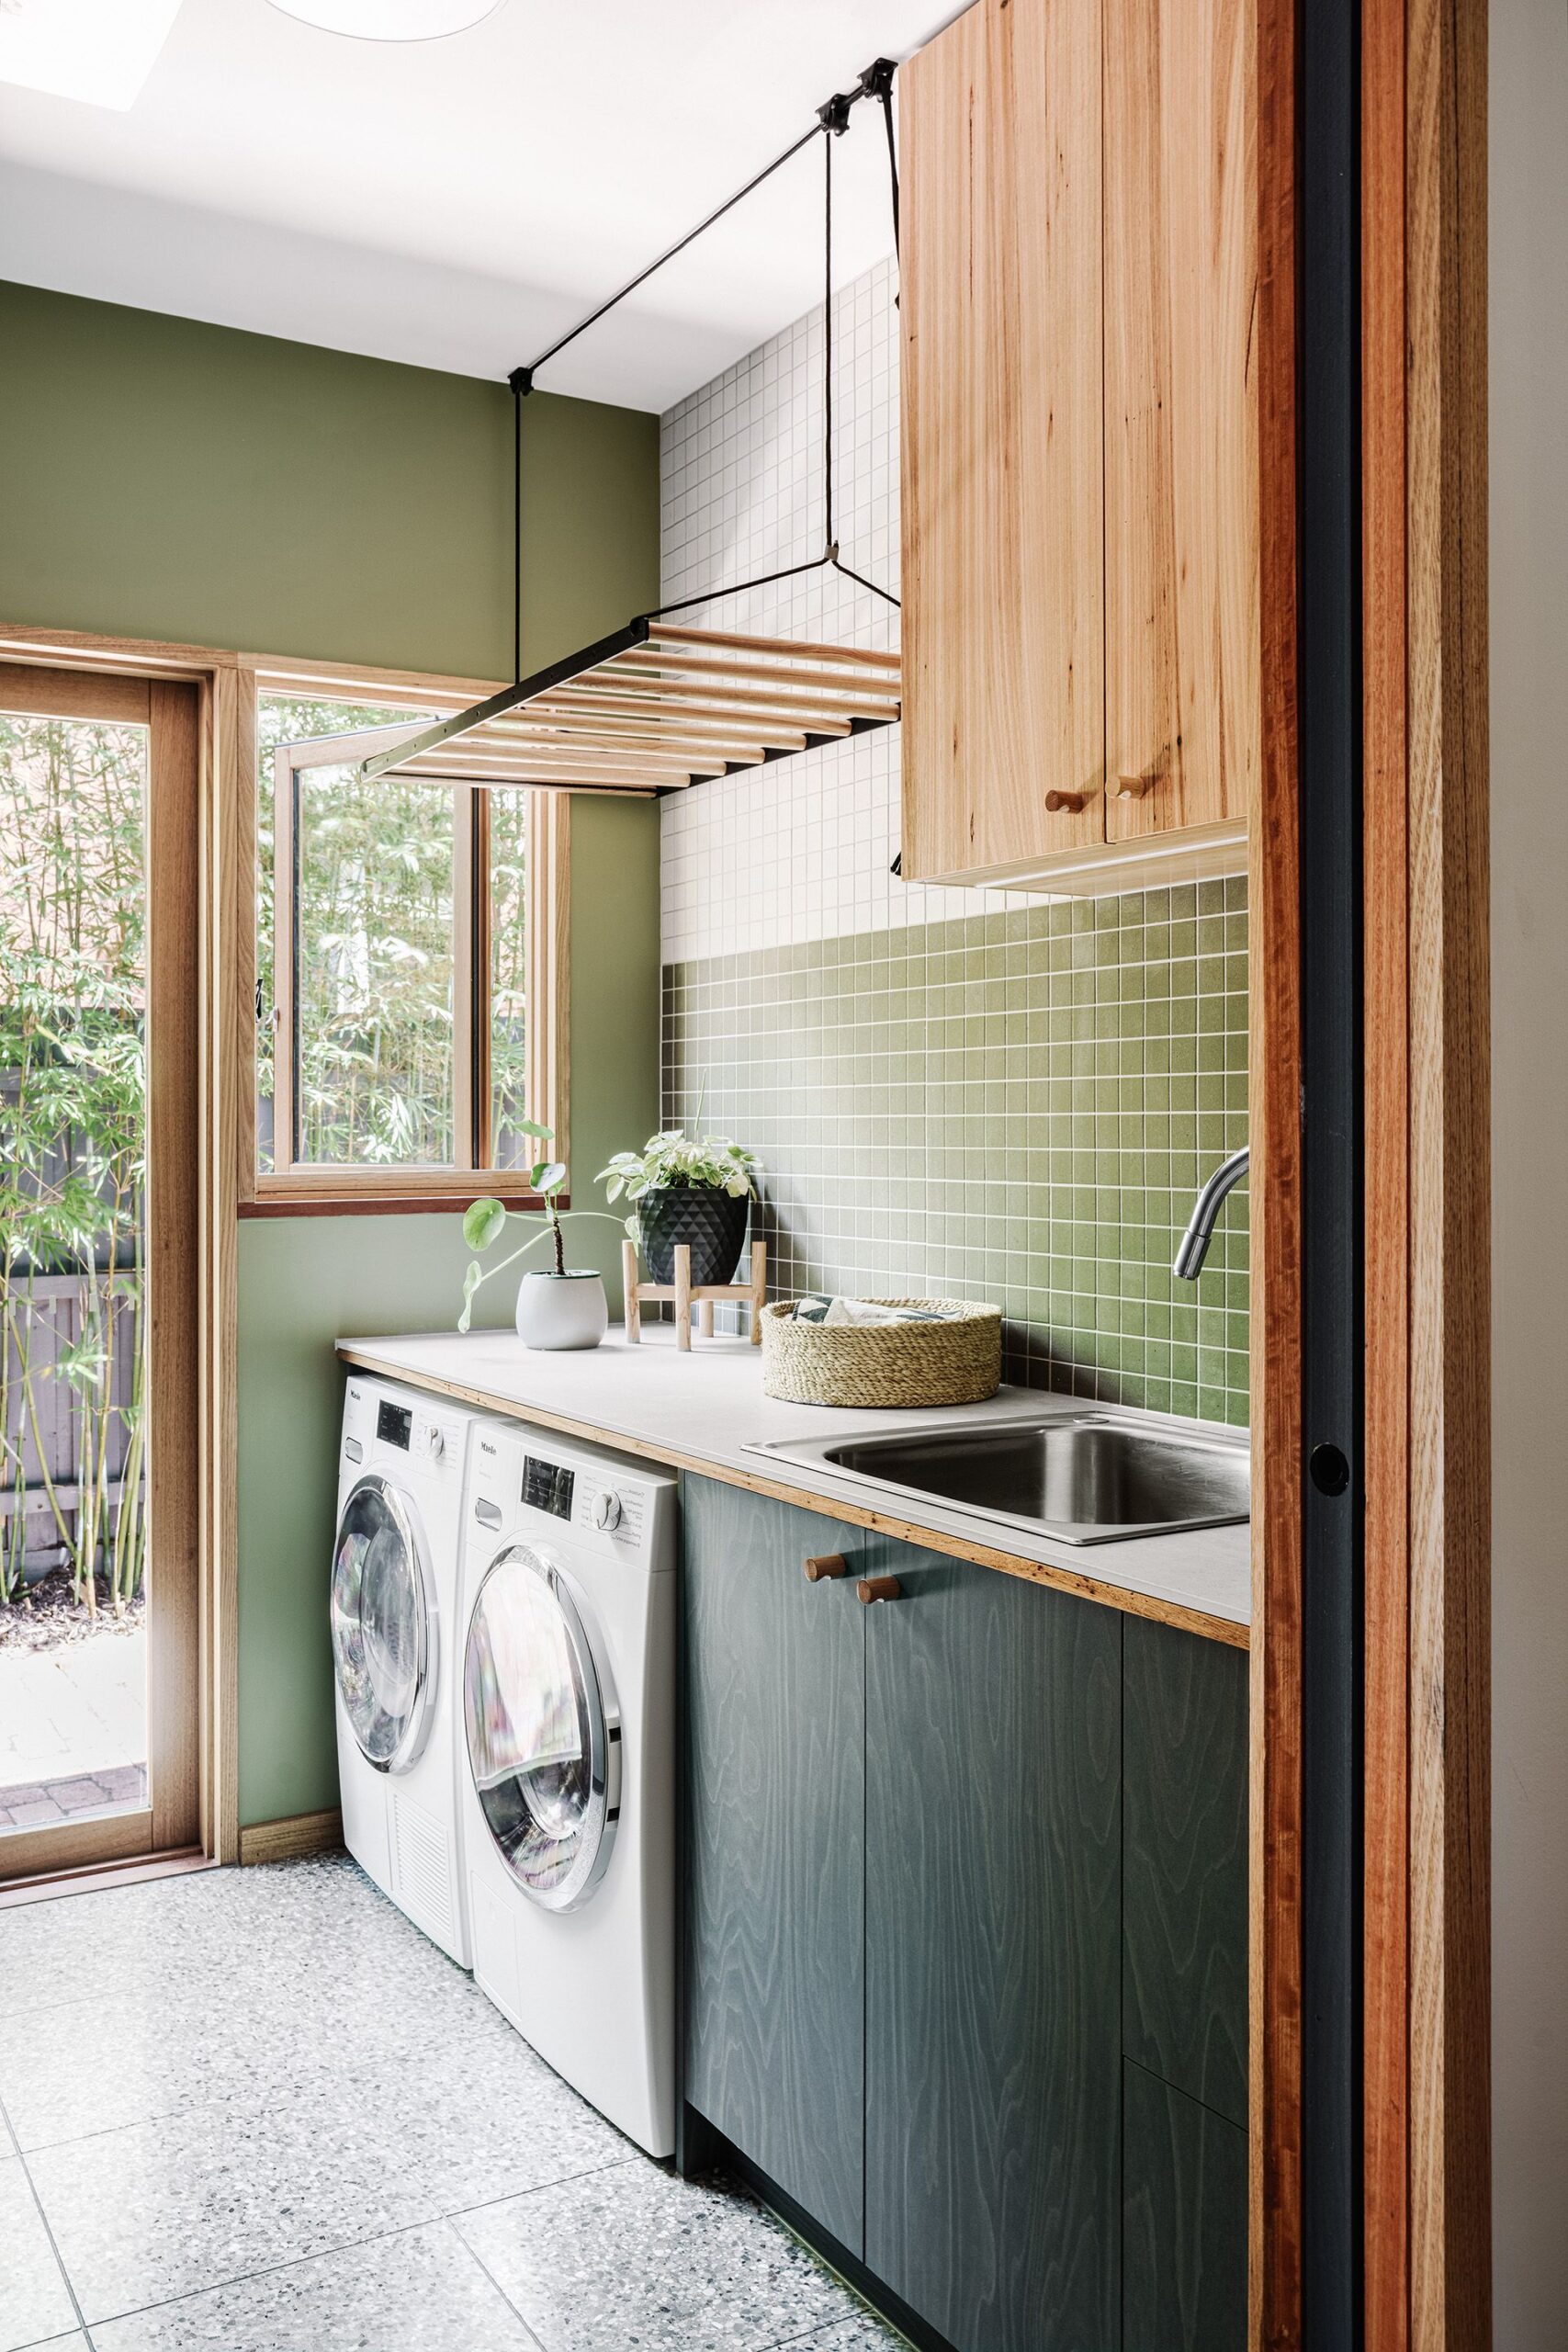 laundry room decorating ideas on a
budget  : maximize storage space